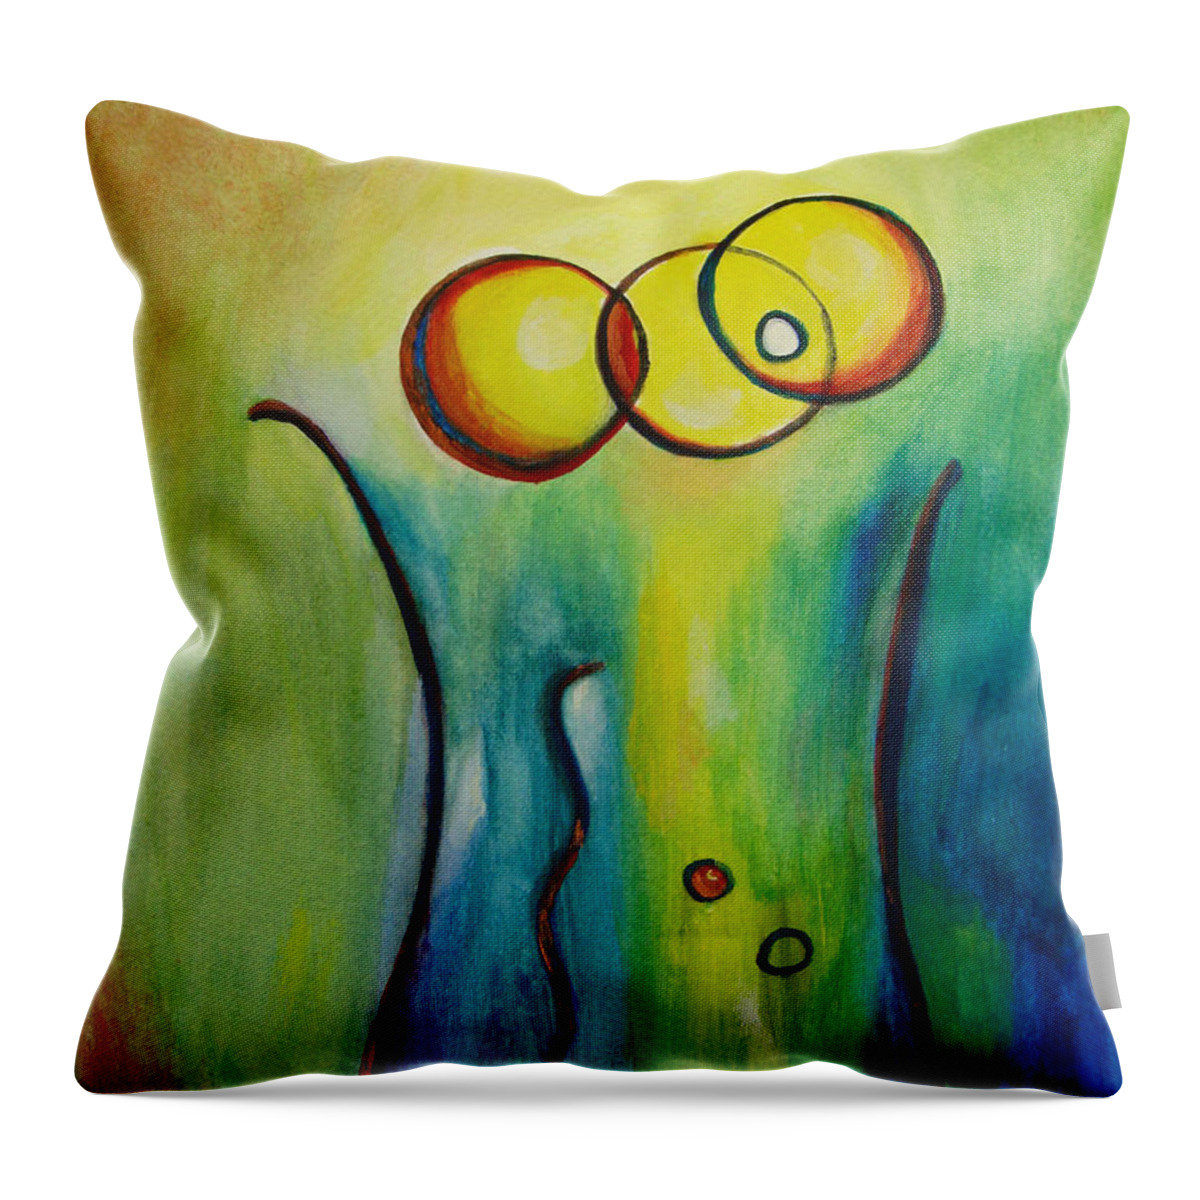 Abstract Throw Pillow featuring the painting Champagne by Donna Blackhall